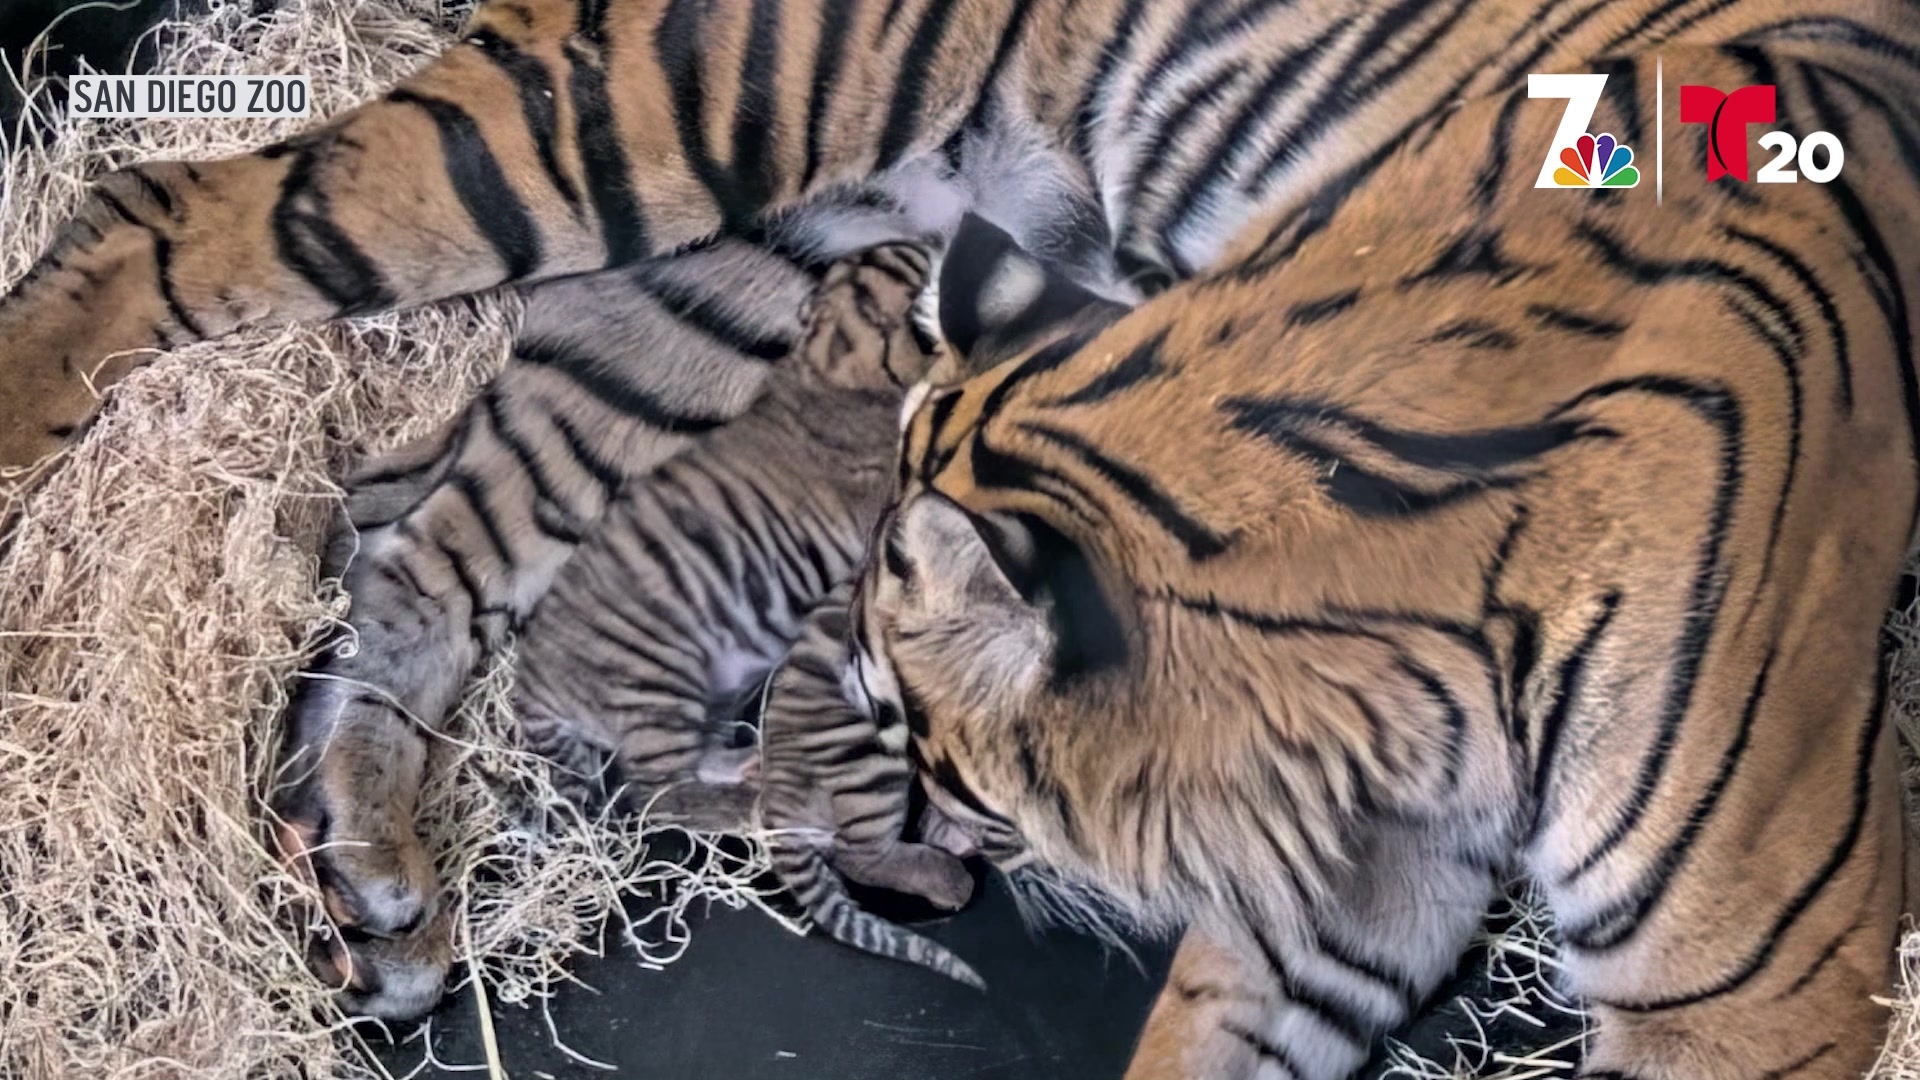 Two Tiger Cubs Play Image & Photo (Free Trial)